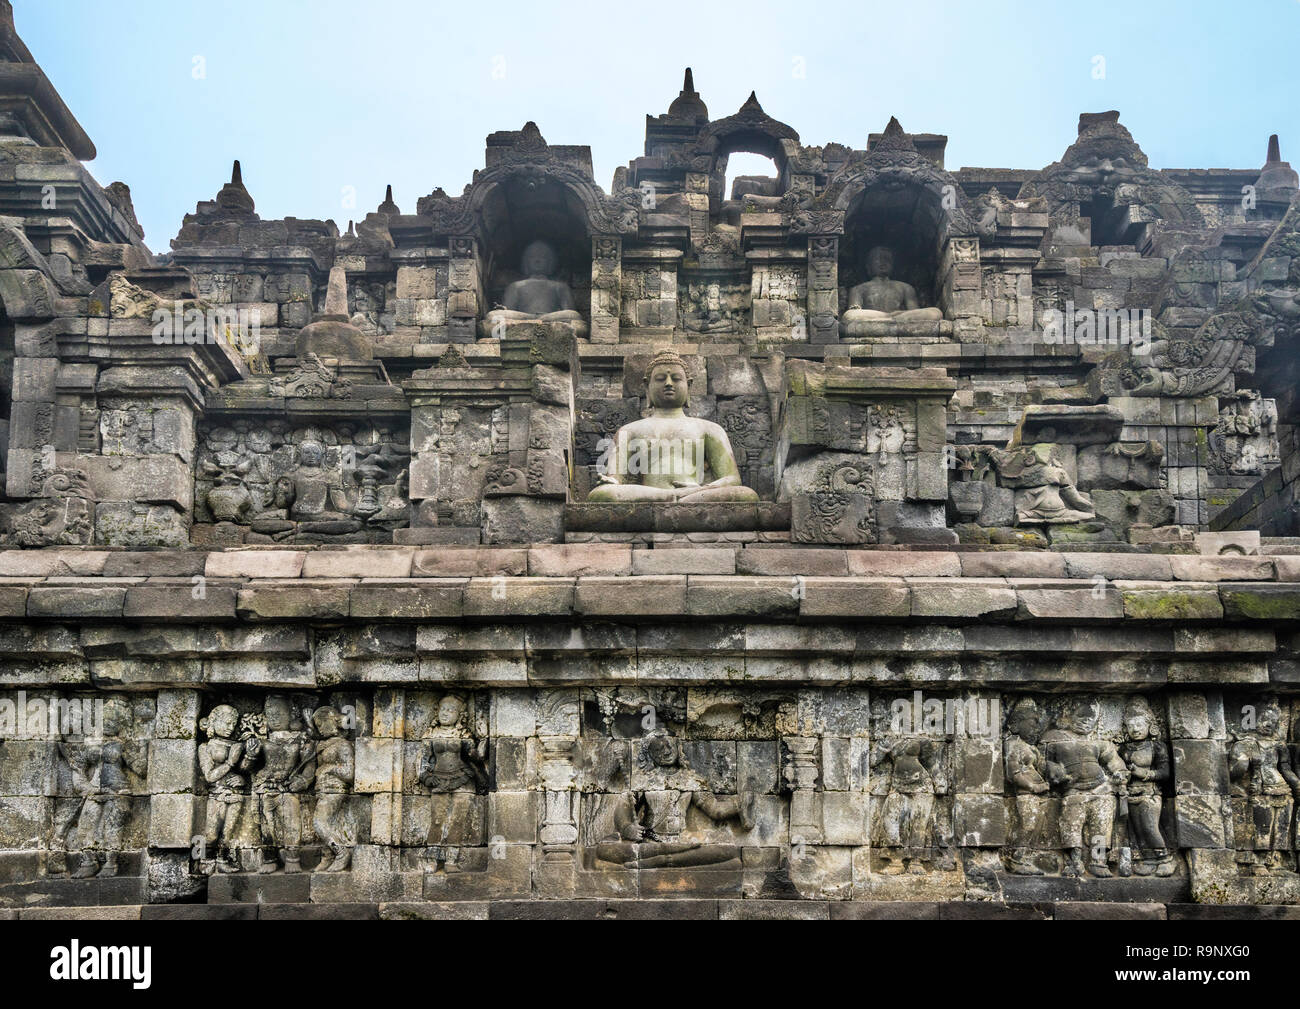 bas-relief panels with narratives of Buddhist mythology and life in Java of the period below niches with sitting Buddha statues on the terraces of 9th Stock Photo